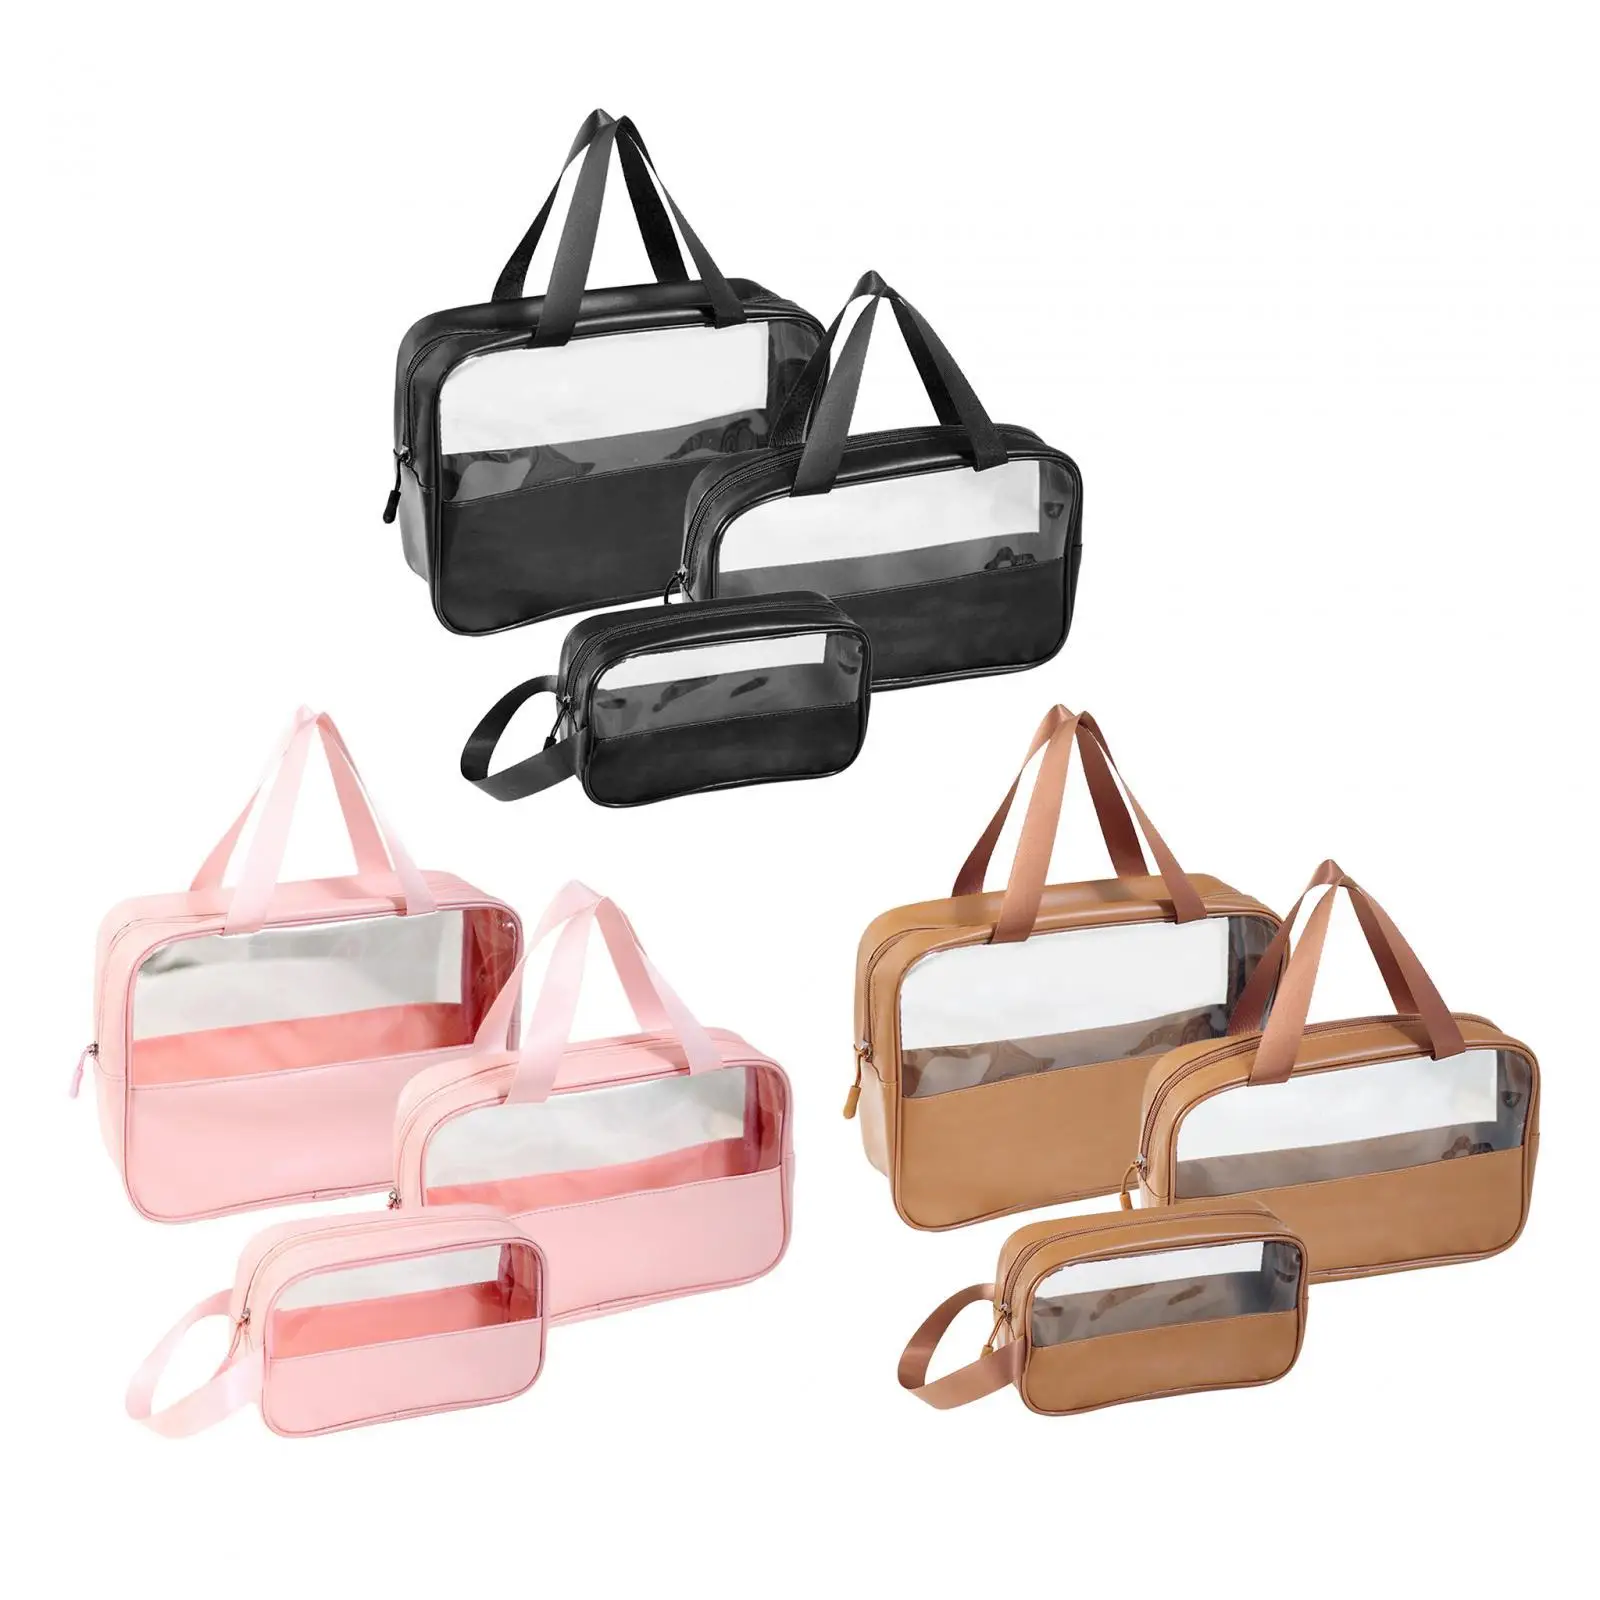 3Pcs Clear Makeup Bag Cosmetic Bag Pouch Make up Organizer Clear Travel Bag with Zipper Storage Bag Cosmetic Case Toiletry Bag